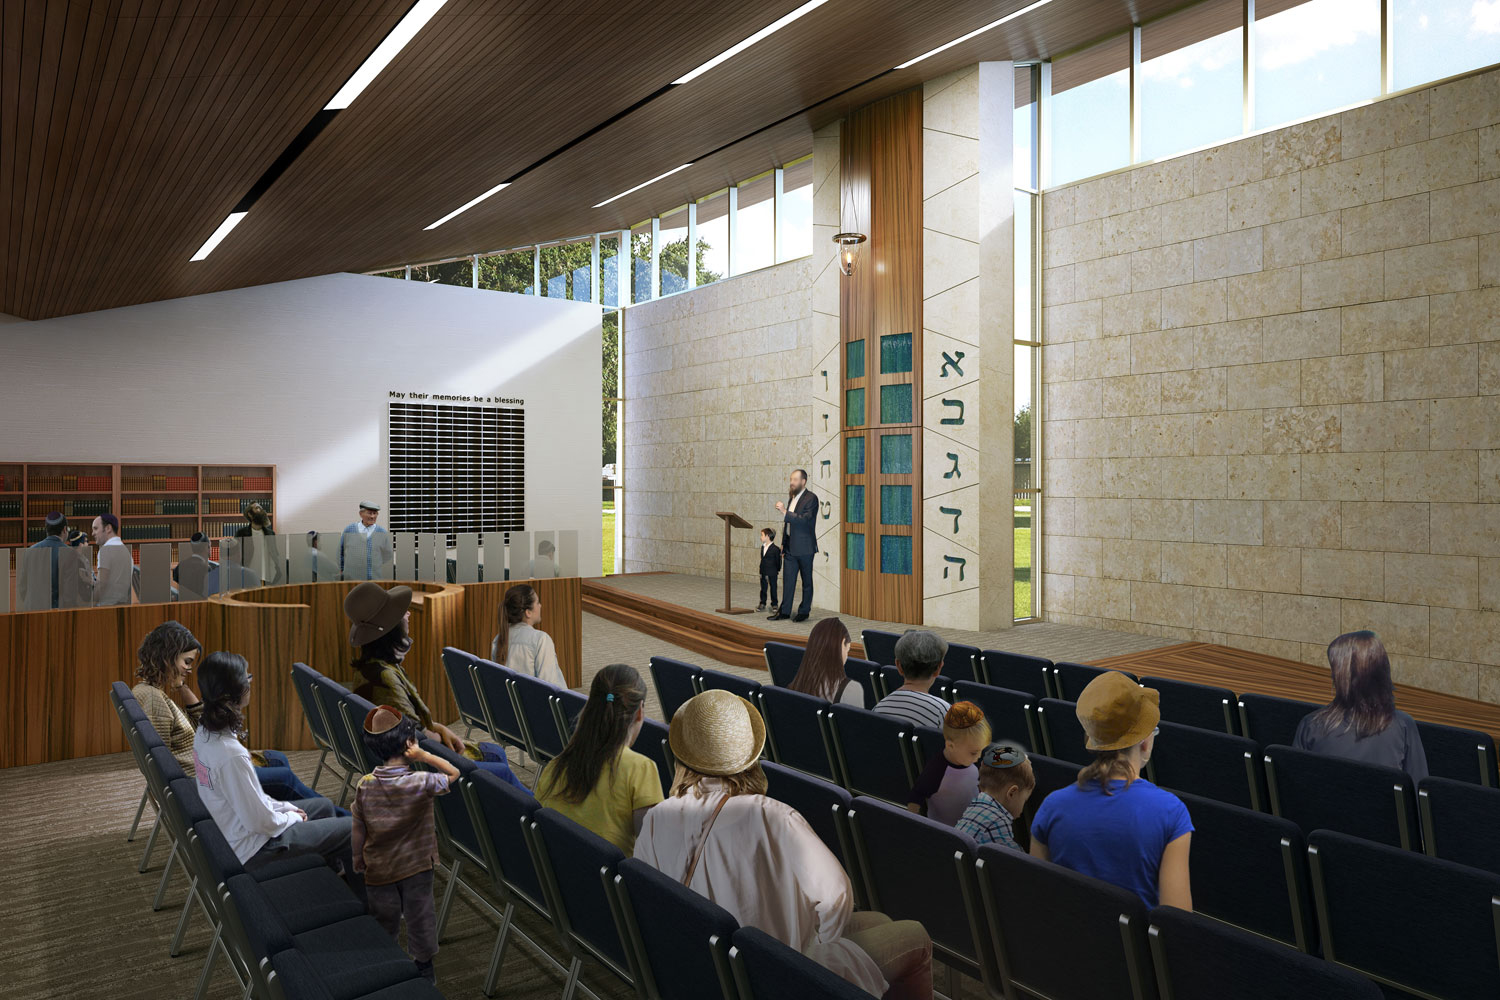 Photorealistic 3d architectural rendering architecture visualization NY NJ New York artistic interior synagogue sanctuary shul